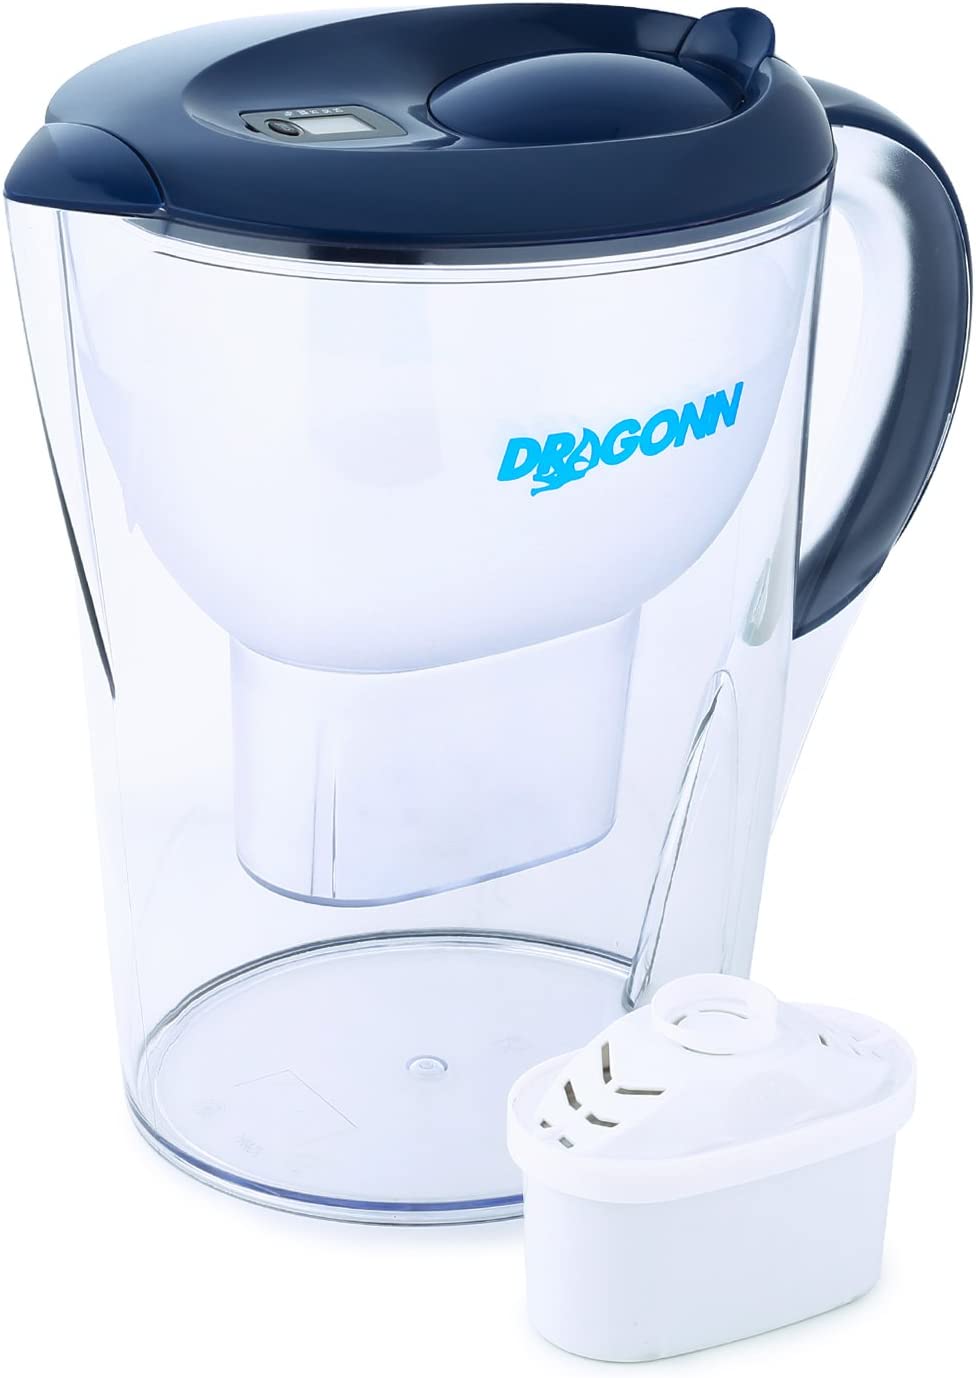 DRAGONN Alkaline Water Pitcher – 3.5 Liters, Free Filter Included, Removes Lead, Chlorine, Copper and More, PH 8.5-9.5 Enhanced 2019 Model, DN-KW-WP01